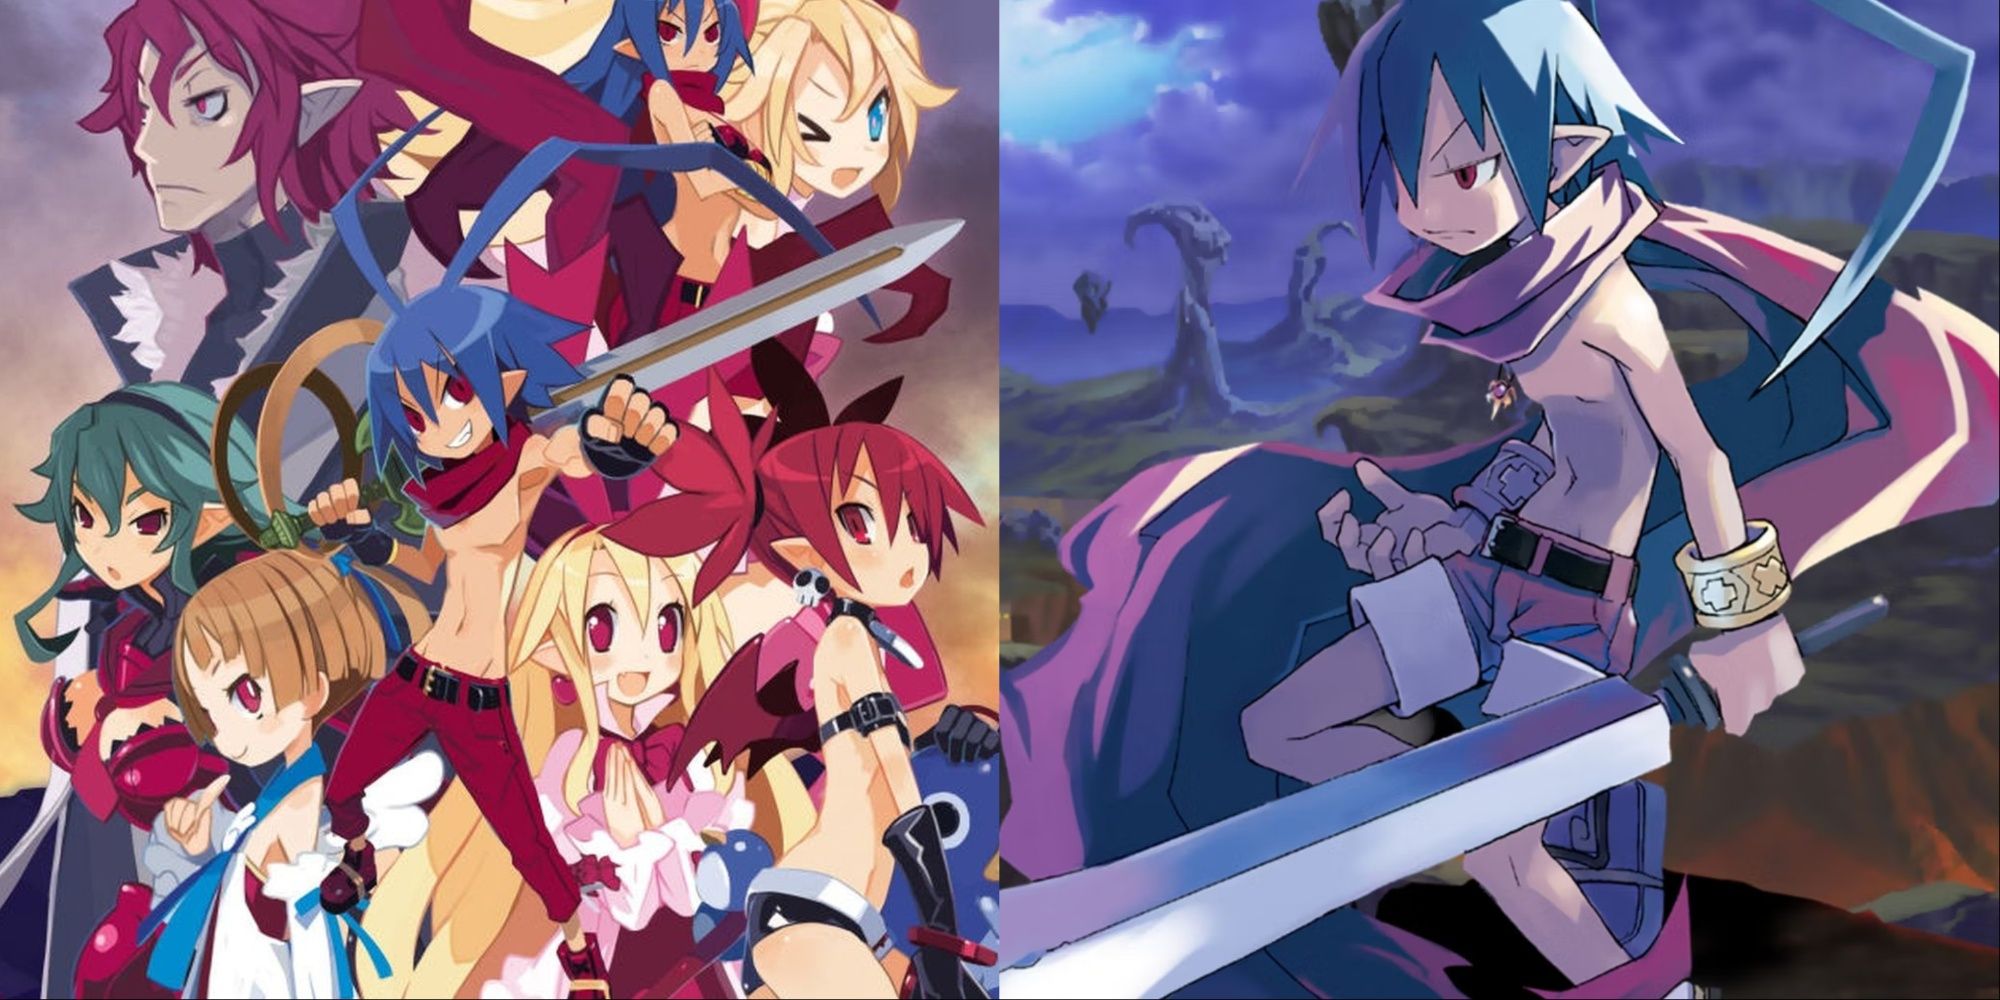 A collage showing the artwork of Disgaea D2 and Disgaea Infinite.